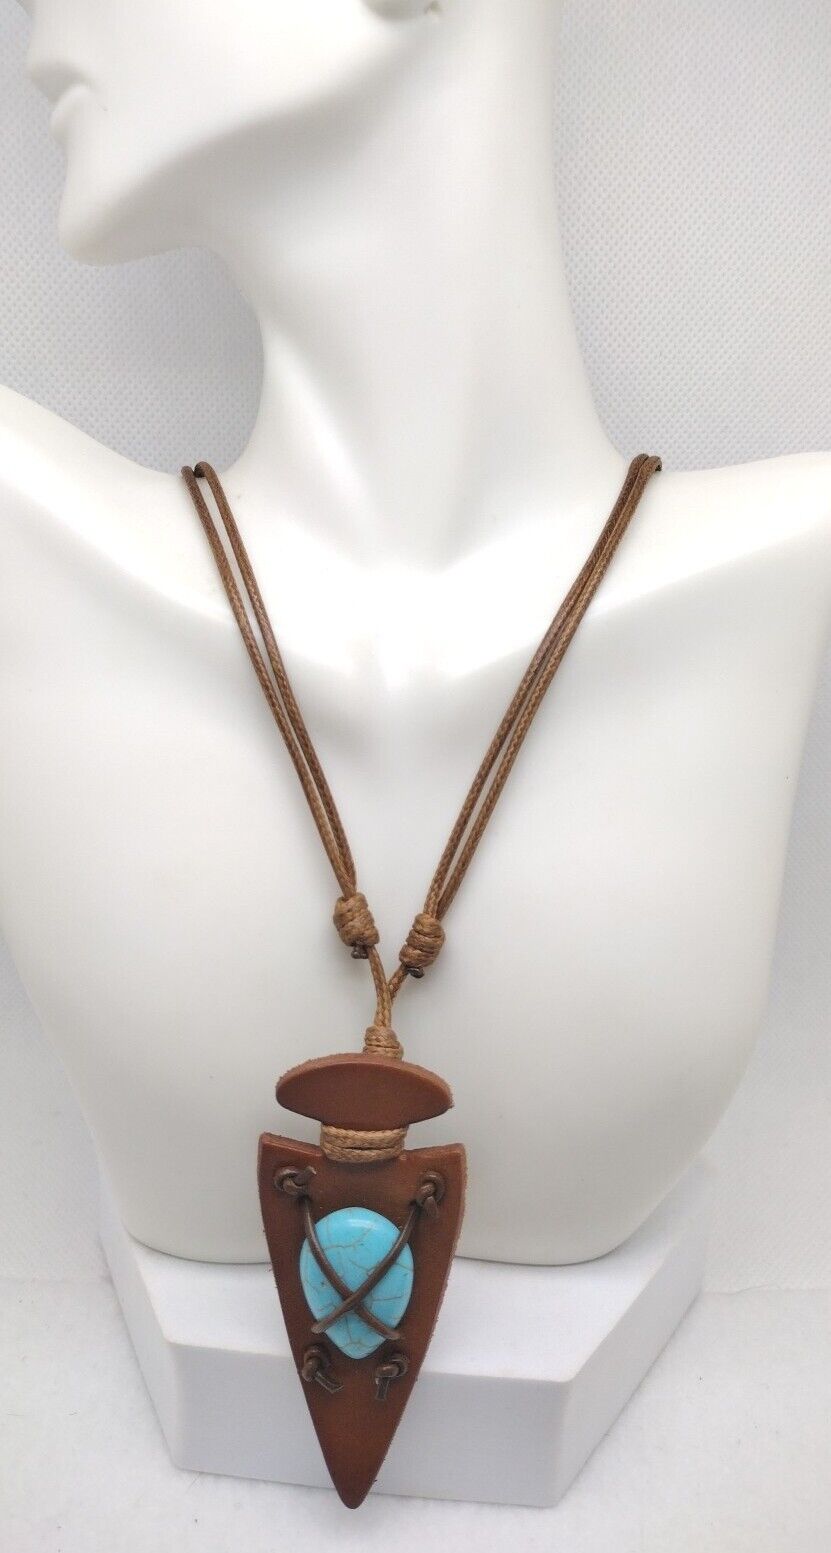 Brown Leather Bound Arrow Head Turquoise Stone Necklace Jewelry Great Gift.